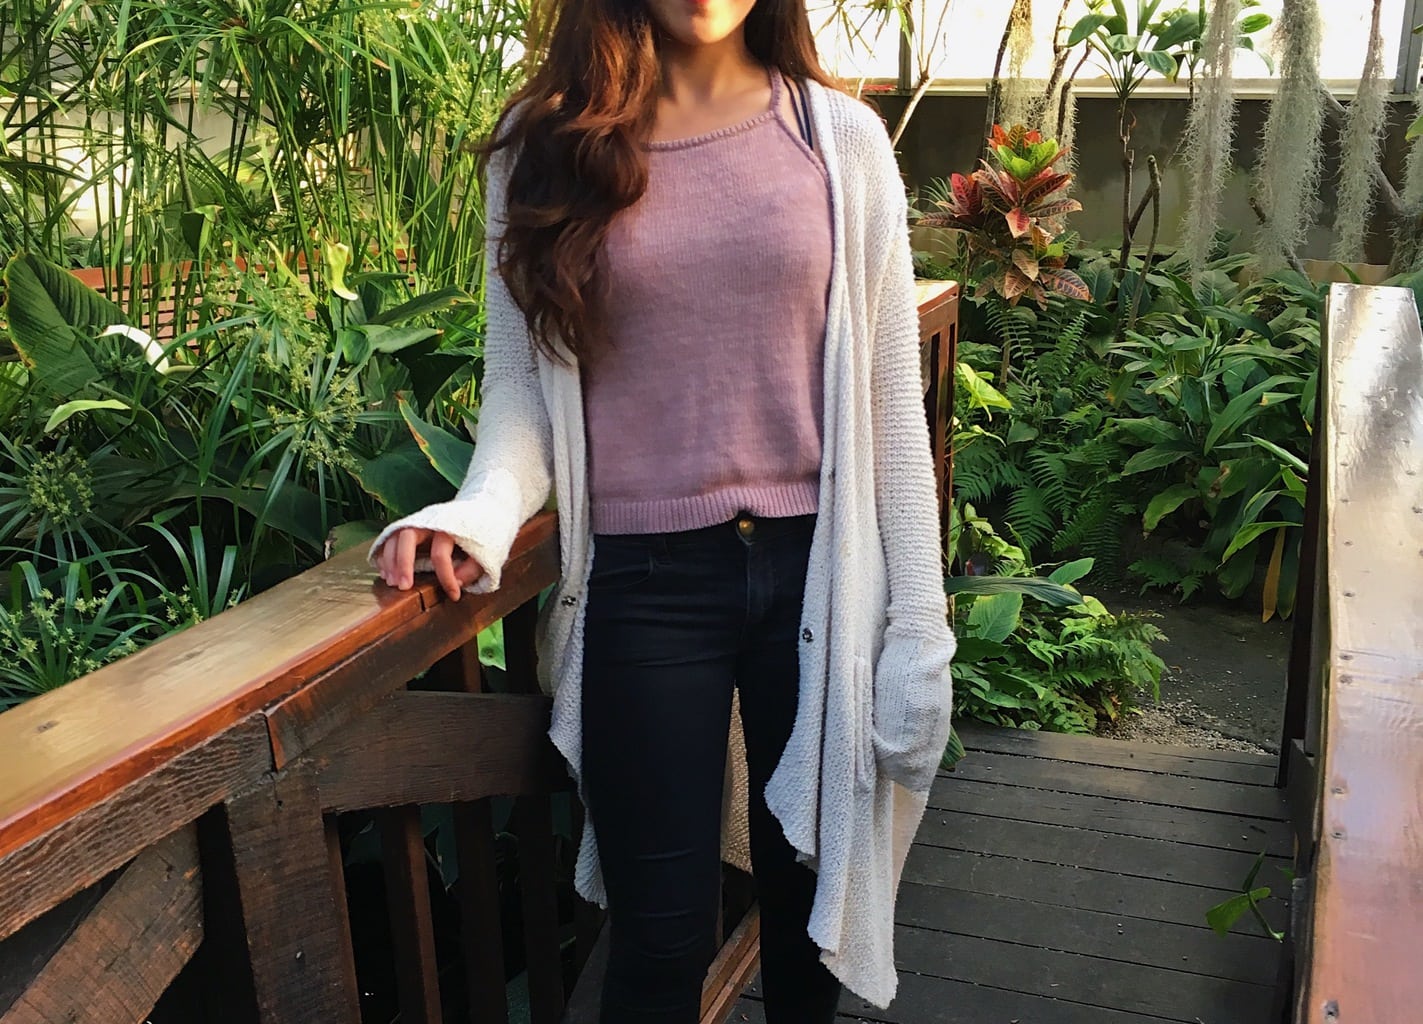 UMass Amherst student Aren wears a simple mauve high-neck knit cami top with a long oatmeal cardigan and dark wash jeans.